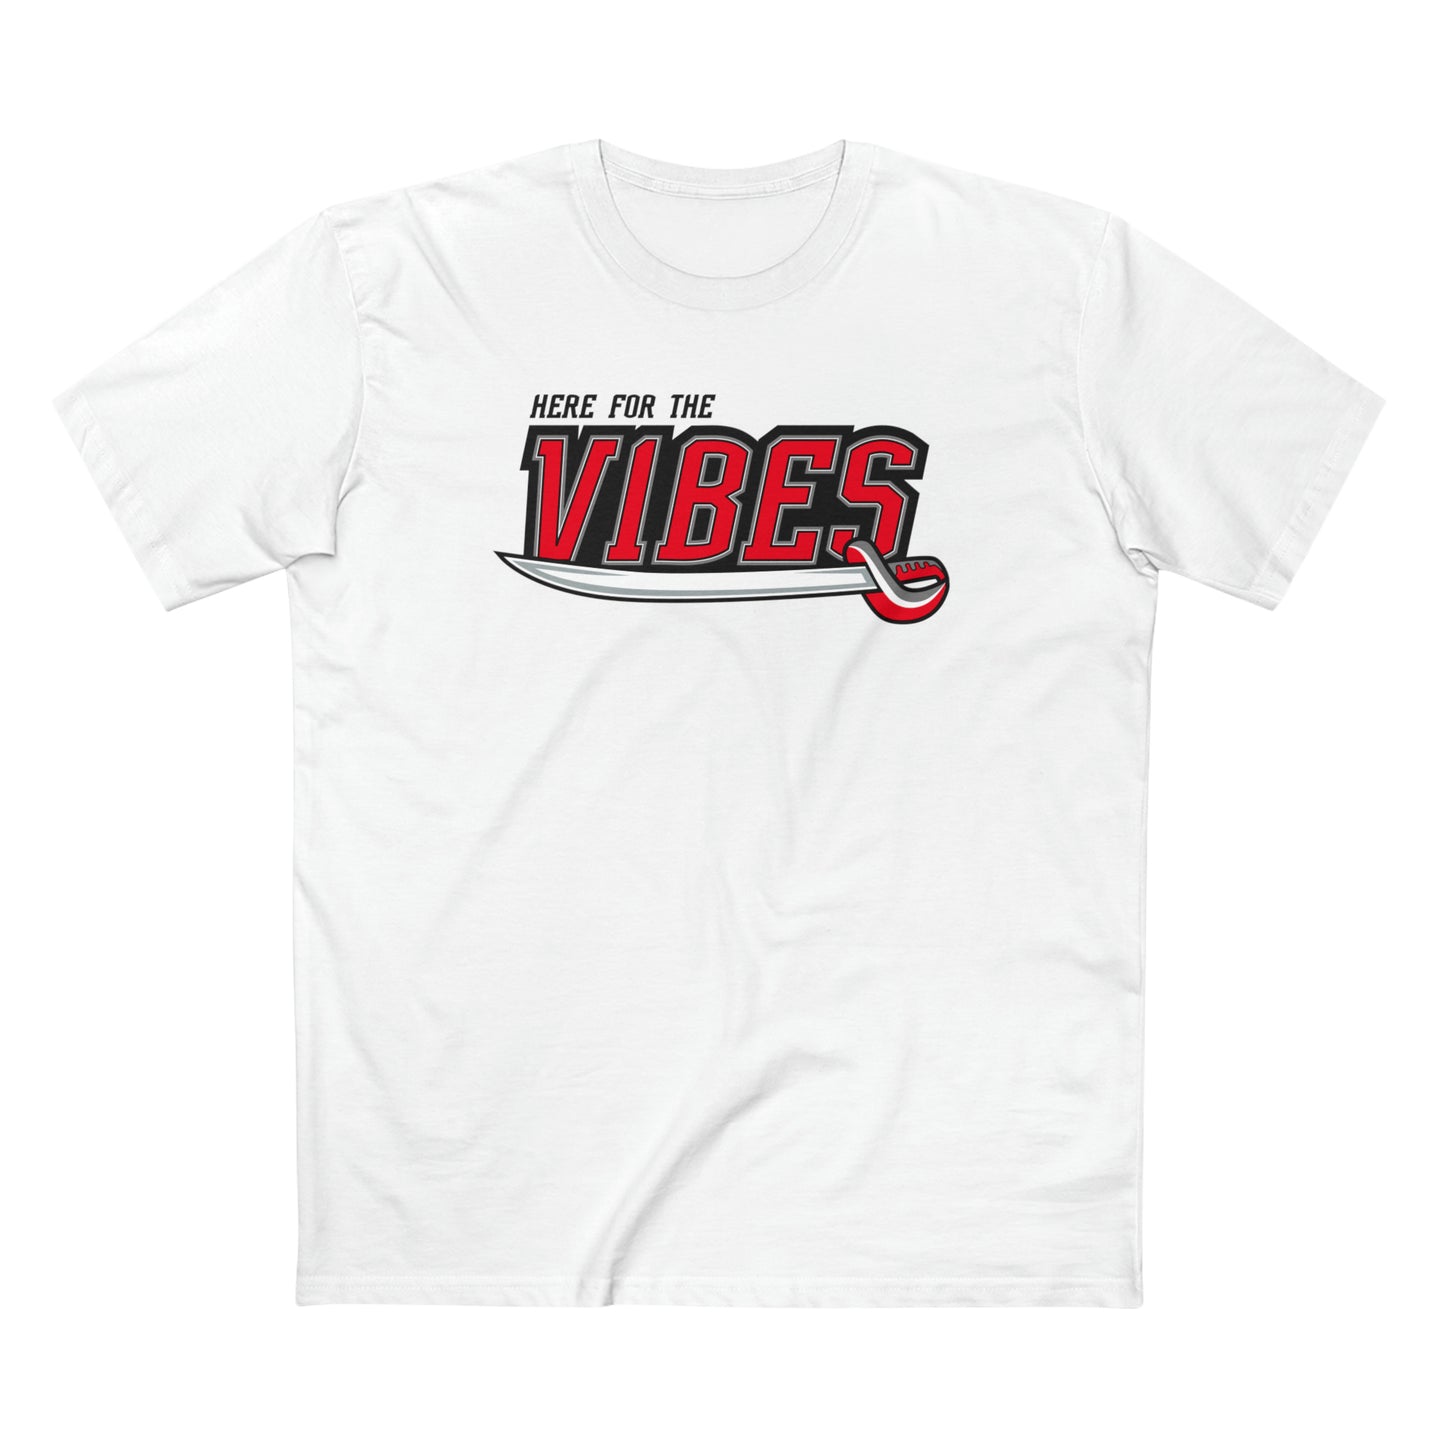 Briggs Milburn Design & Supply - Here For The Vibes - White